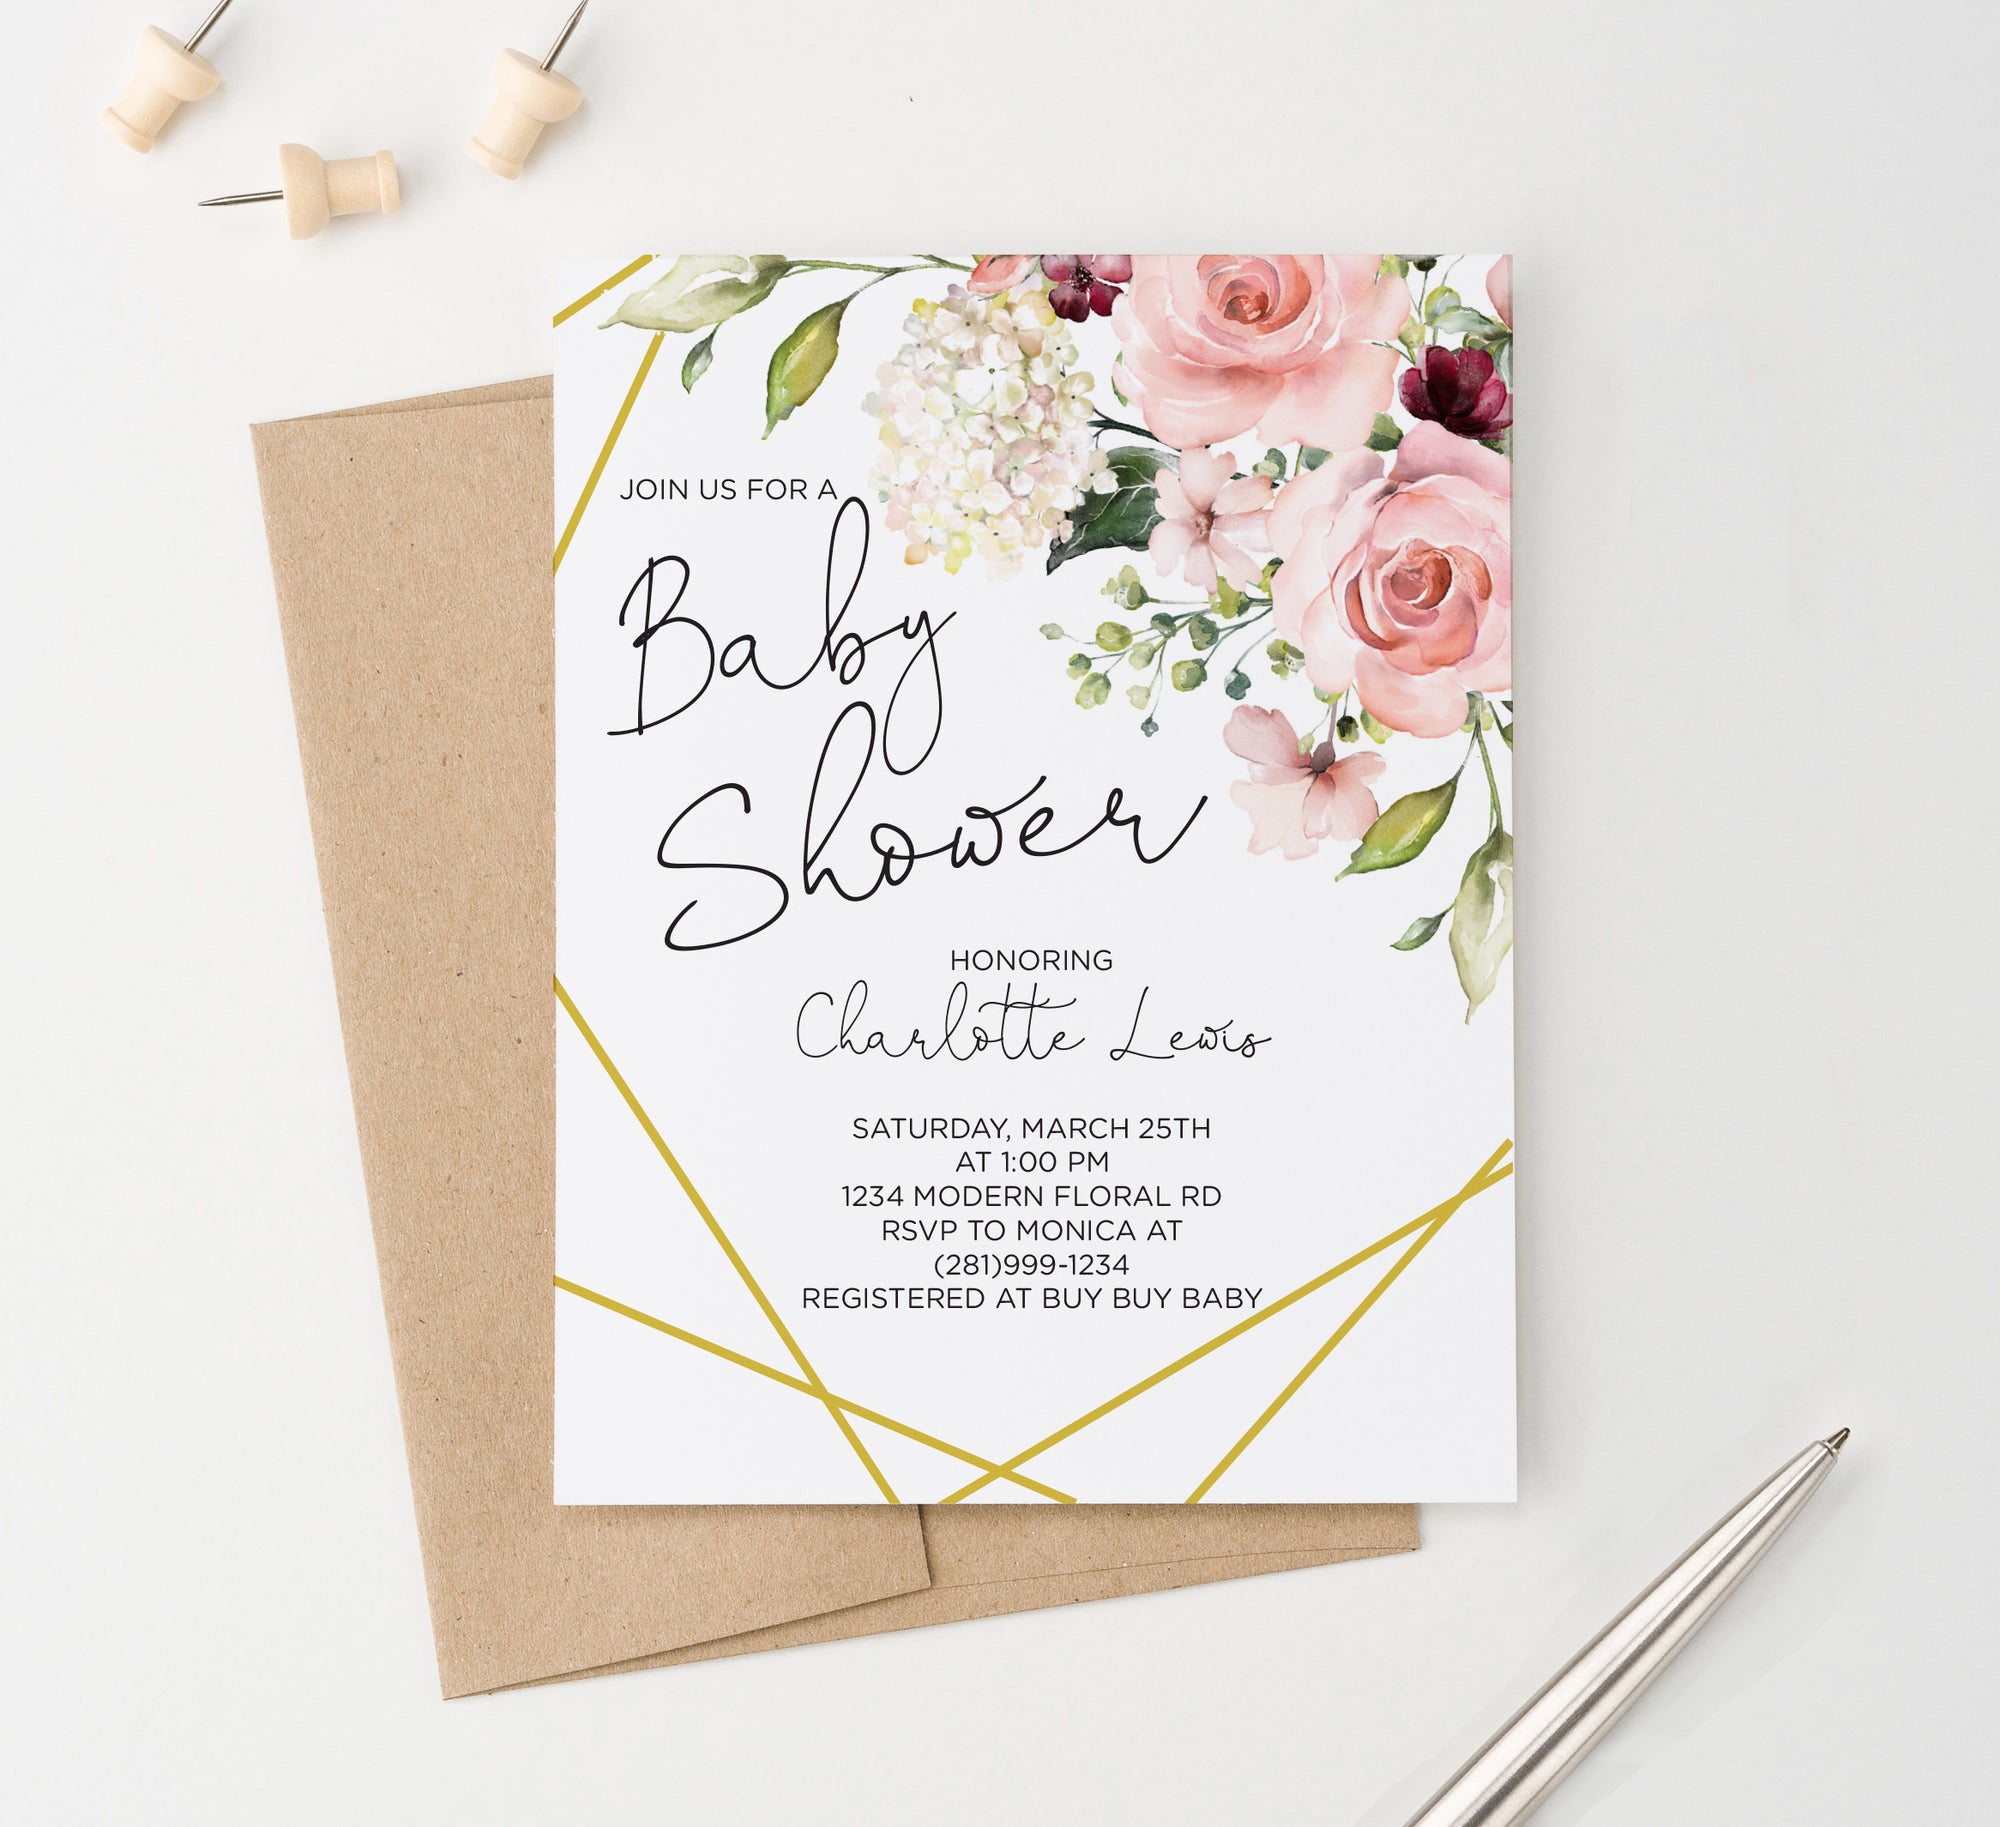 Personalized Elegant Gold Baby Shower Invitations With Floral Corner